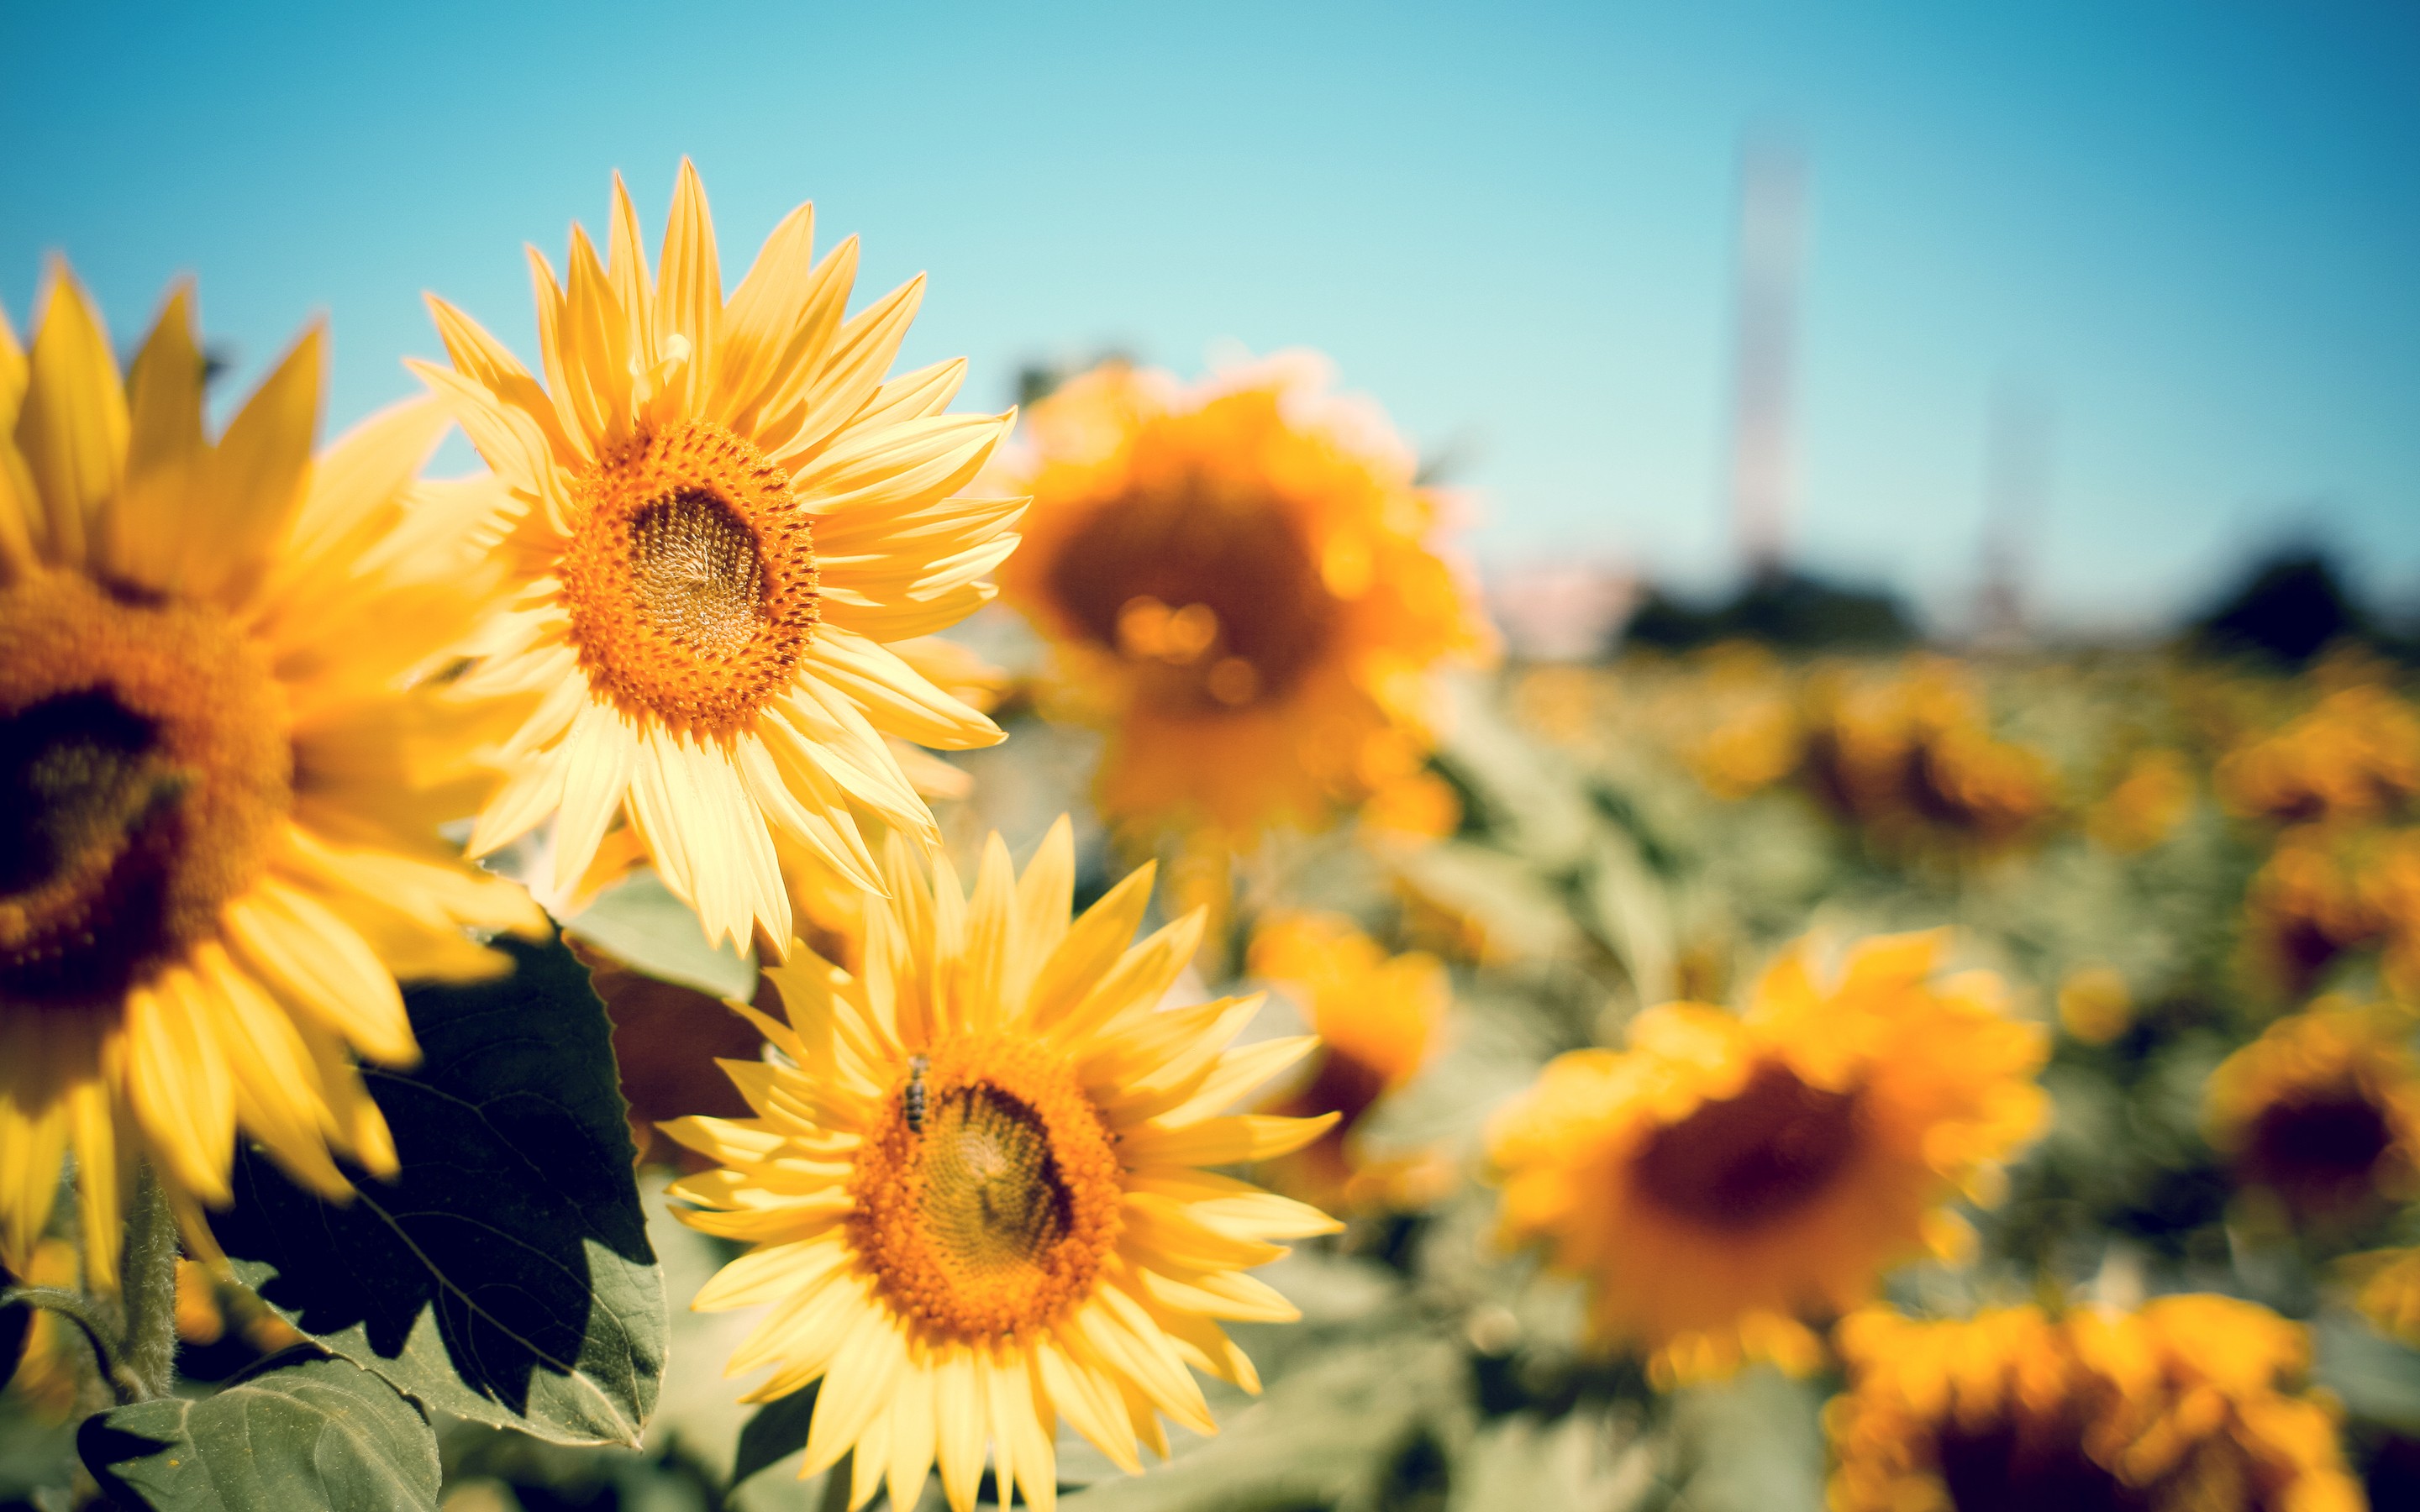 A field of sunflowers with blue sky in the background - Chromebook, sunflower, garden